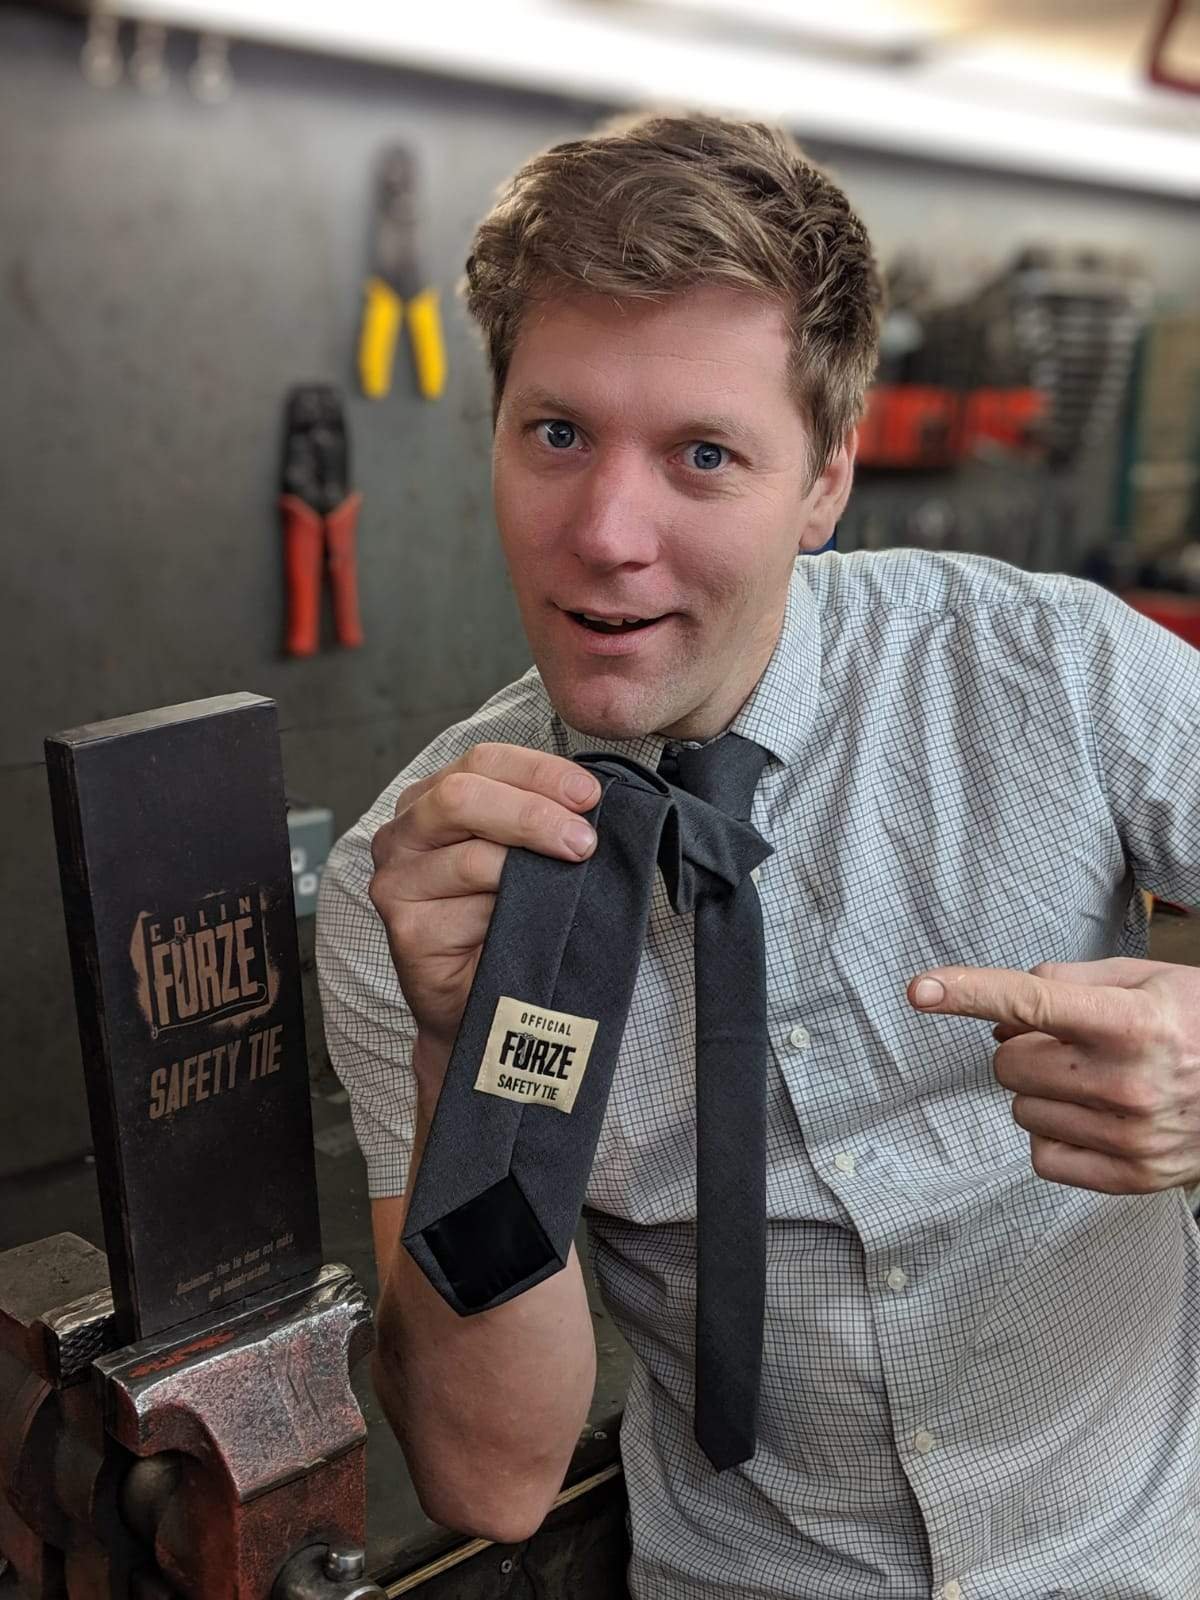 Colin Furze with his Safety Tie